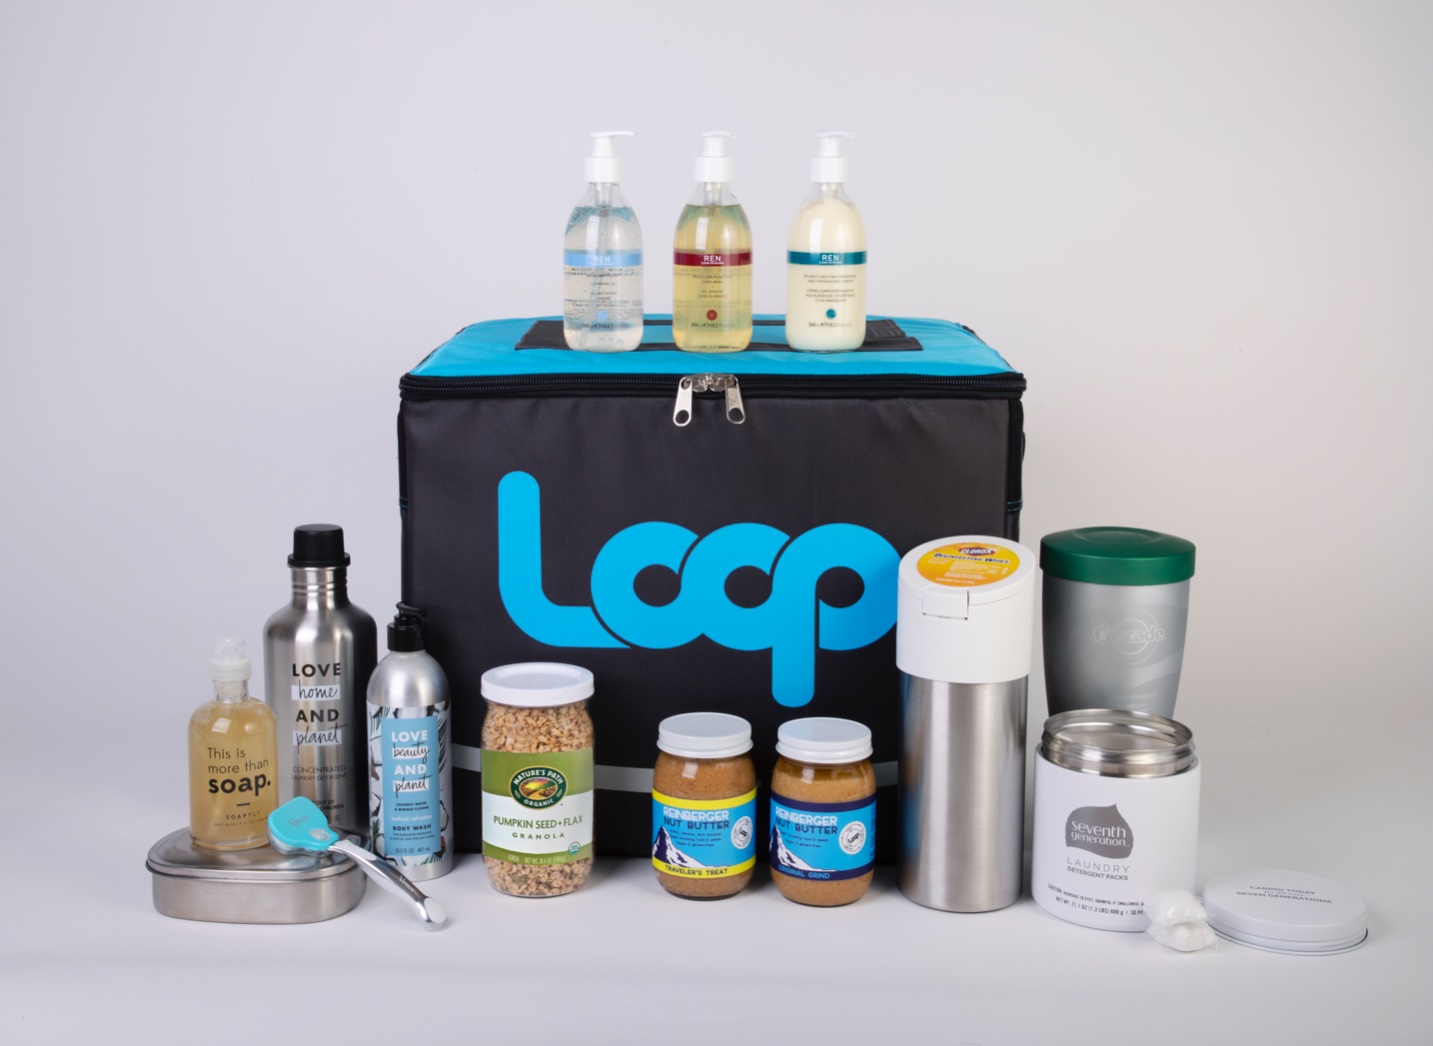 Loop’s Global Reuse Shopping System Is Eliminating Waste Through A Global Reuse Economy